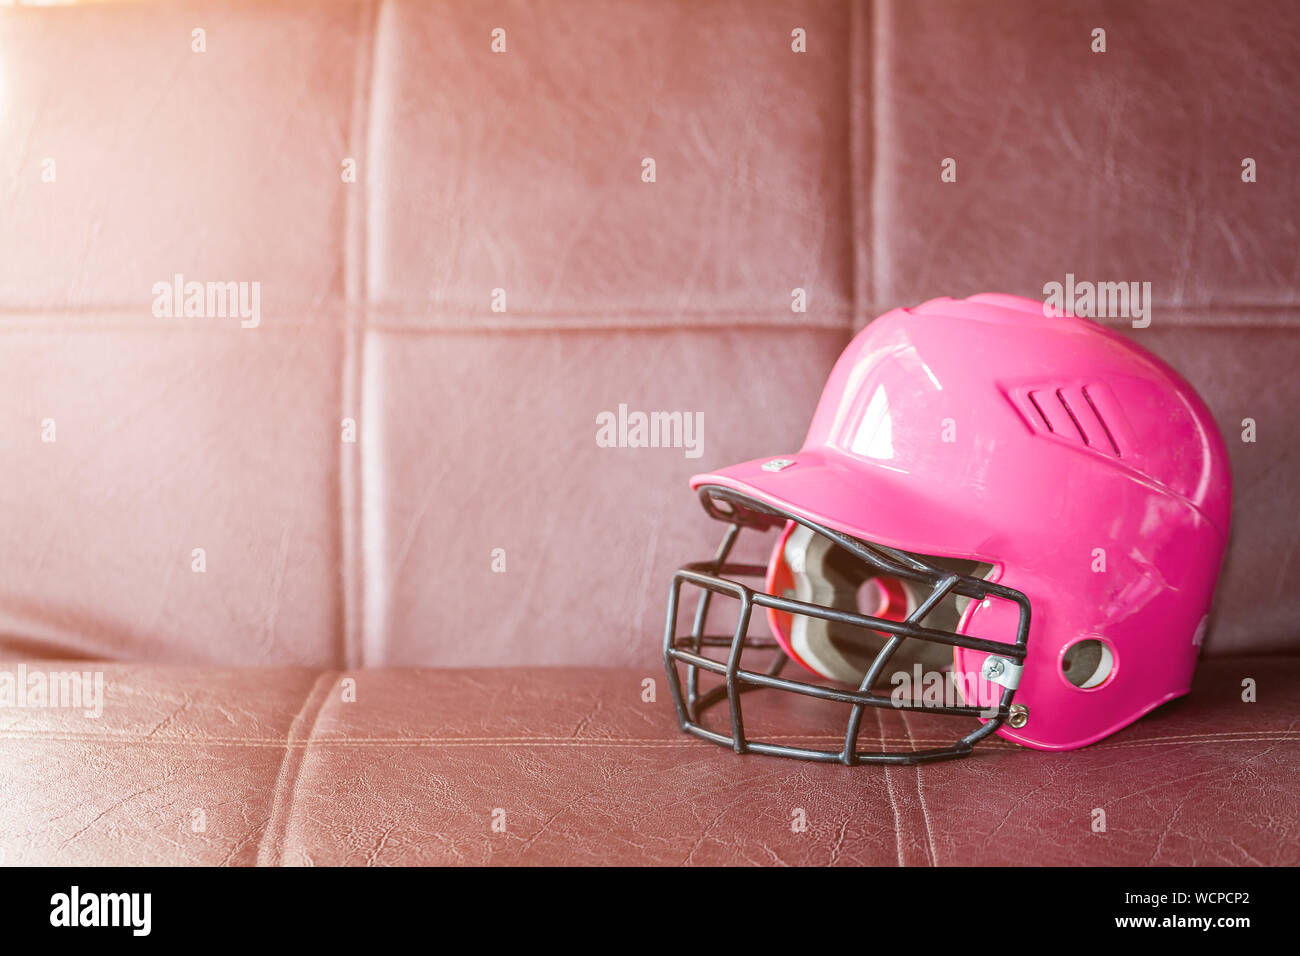 Close-up Of Pink Sports Helmet On Brown Sofa Stock Photo